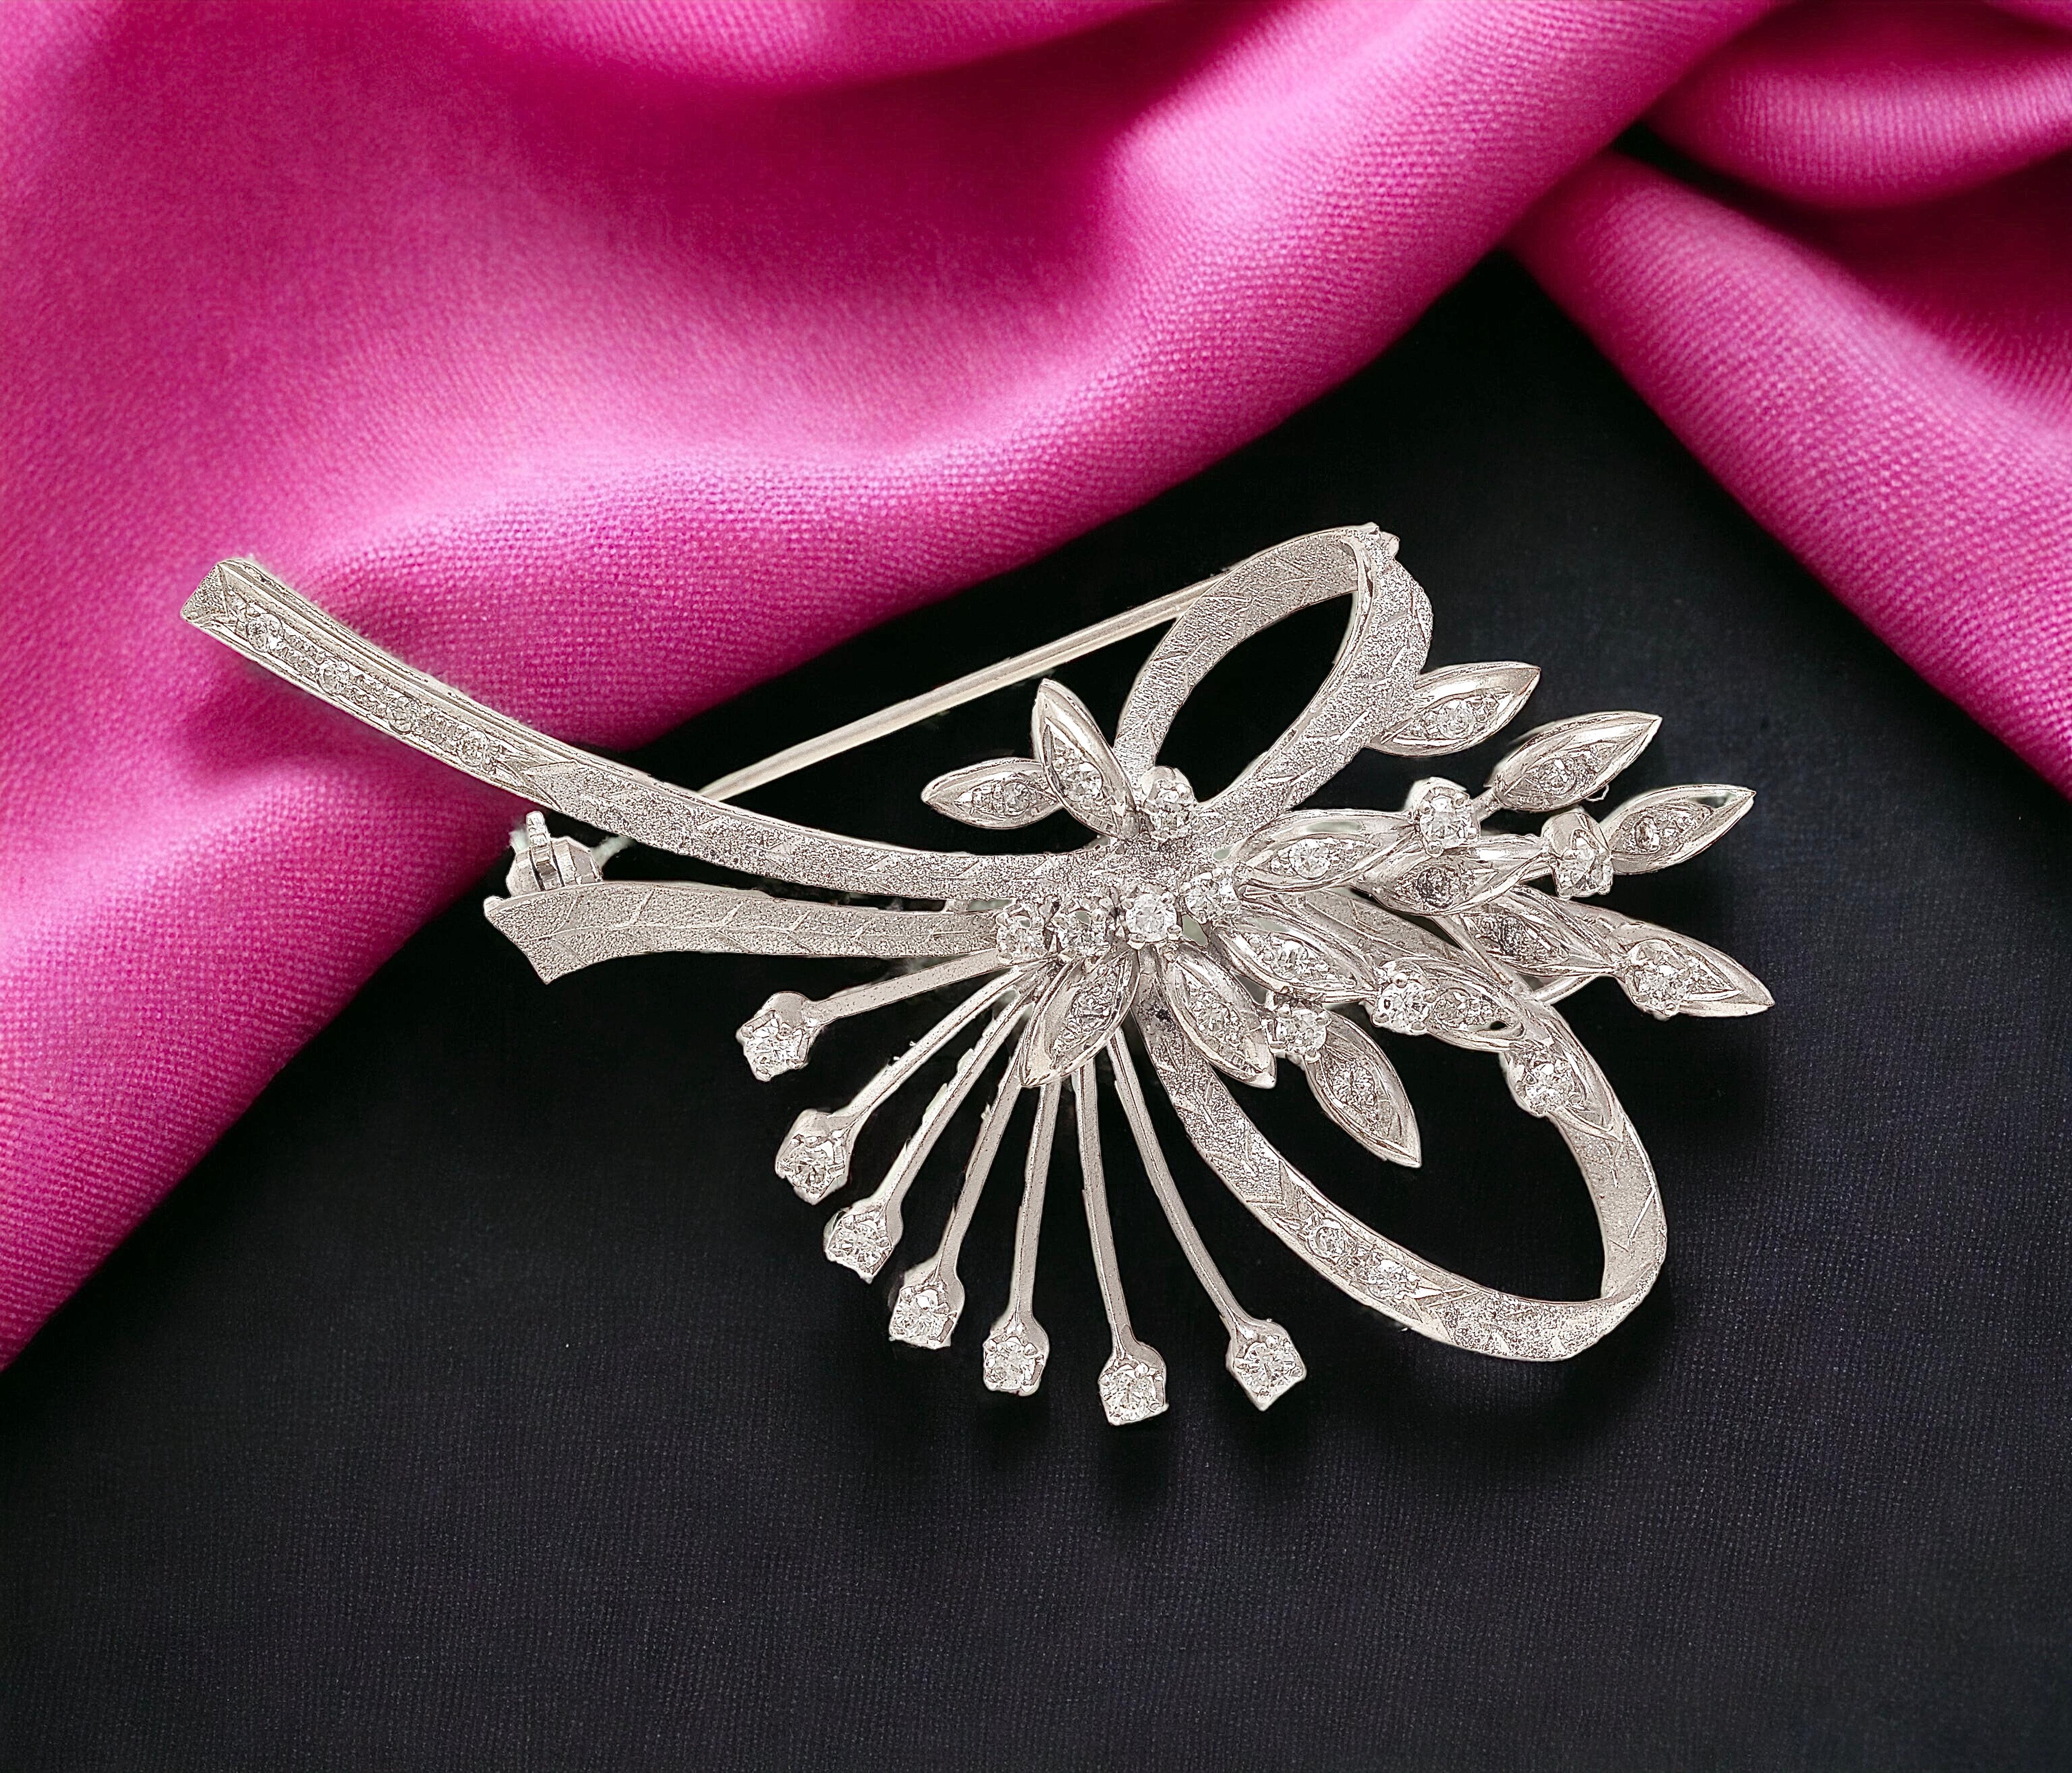 Magnificant 18 kt. White Gold Brooch with 1.52 ct. Brilliant Cut Diamonds

Diamonds: Brilliant cut diamonds together approx. 1.52 ct.

Material :  18 kt. white gold

Measurements: 48.6 mm x 51.1  mm x 15.7 mm

Total weight: 12.4 grams / 0.435 oz / 8